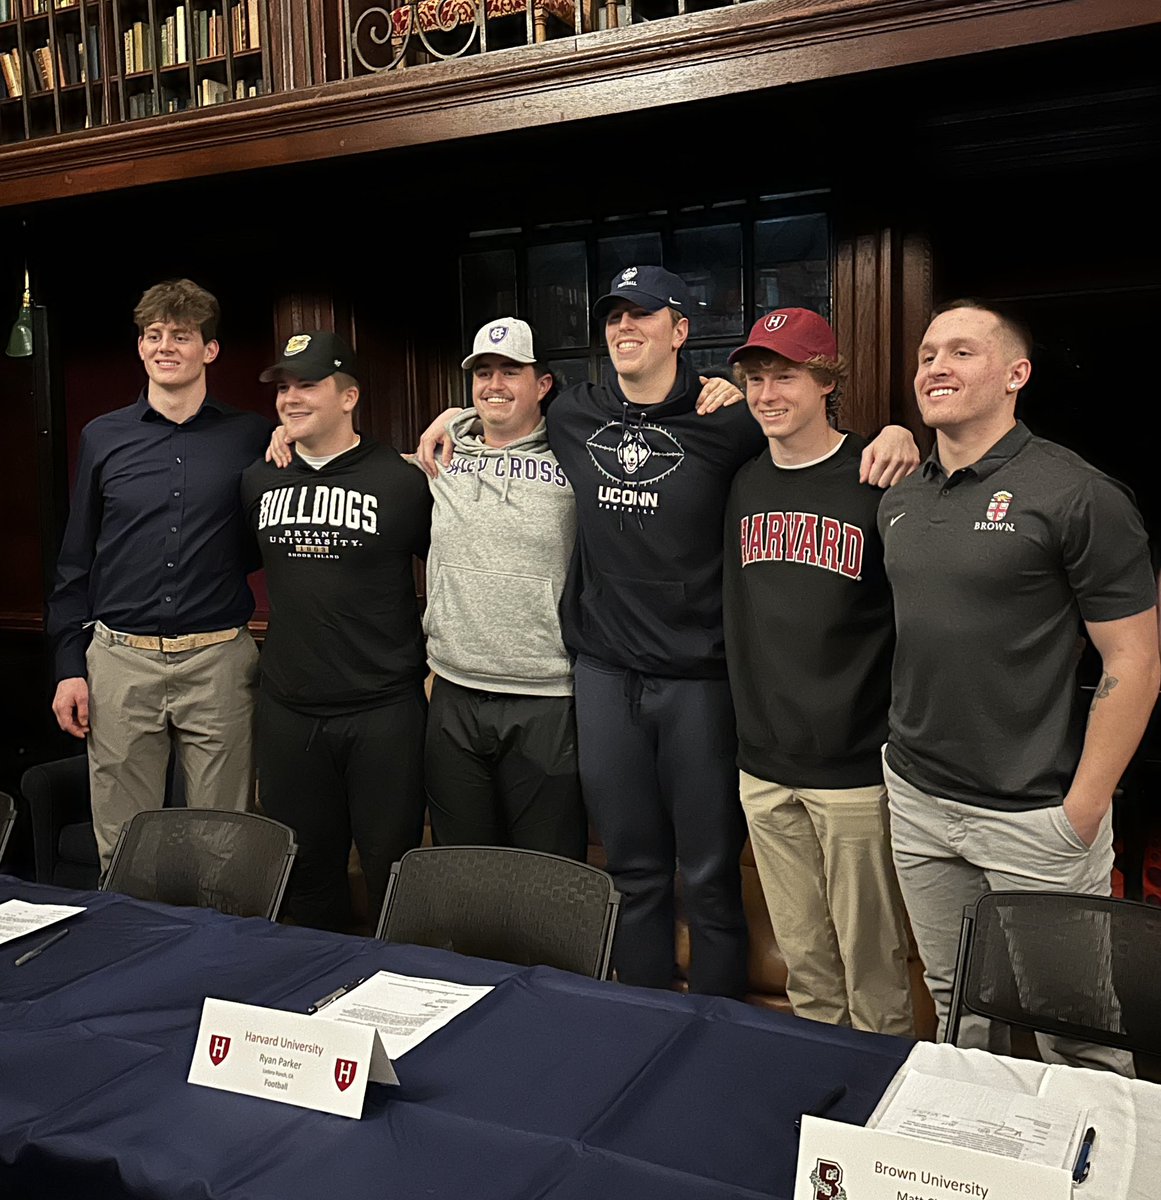 Congrats to these Milton athletes who signed letters of intent tonight to play football at NCAA D1 colleges—Bryce Anderson (UConn), Matt Childs (Brown), Brady Earle (Holy Cross), Will Grant (Maine), Owen Howlett (Bryant), and Ryan Parker (Harvard)!